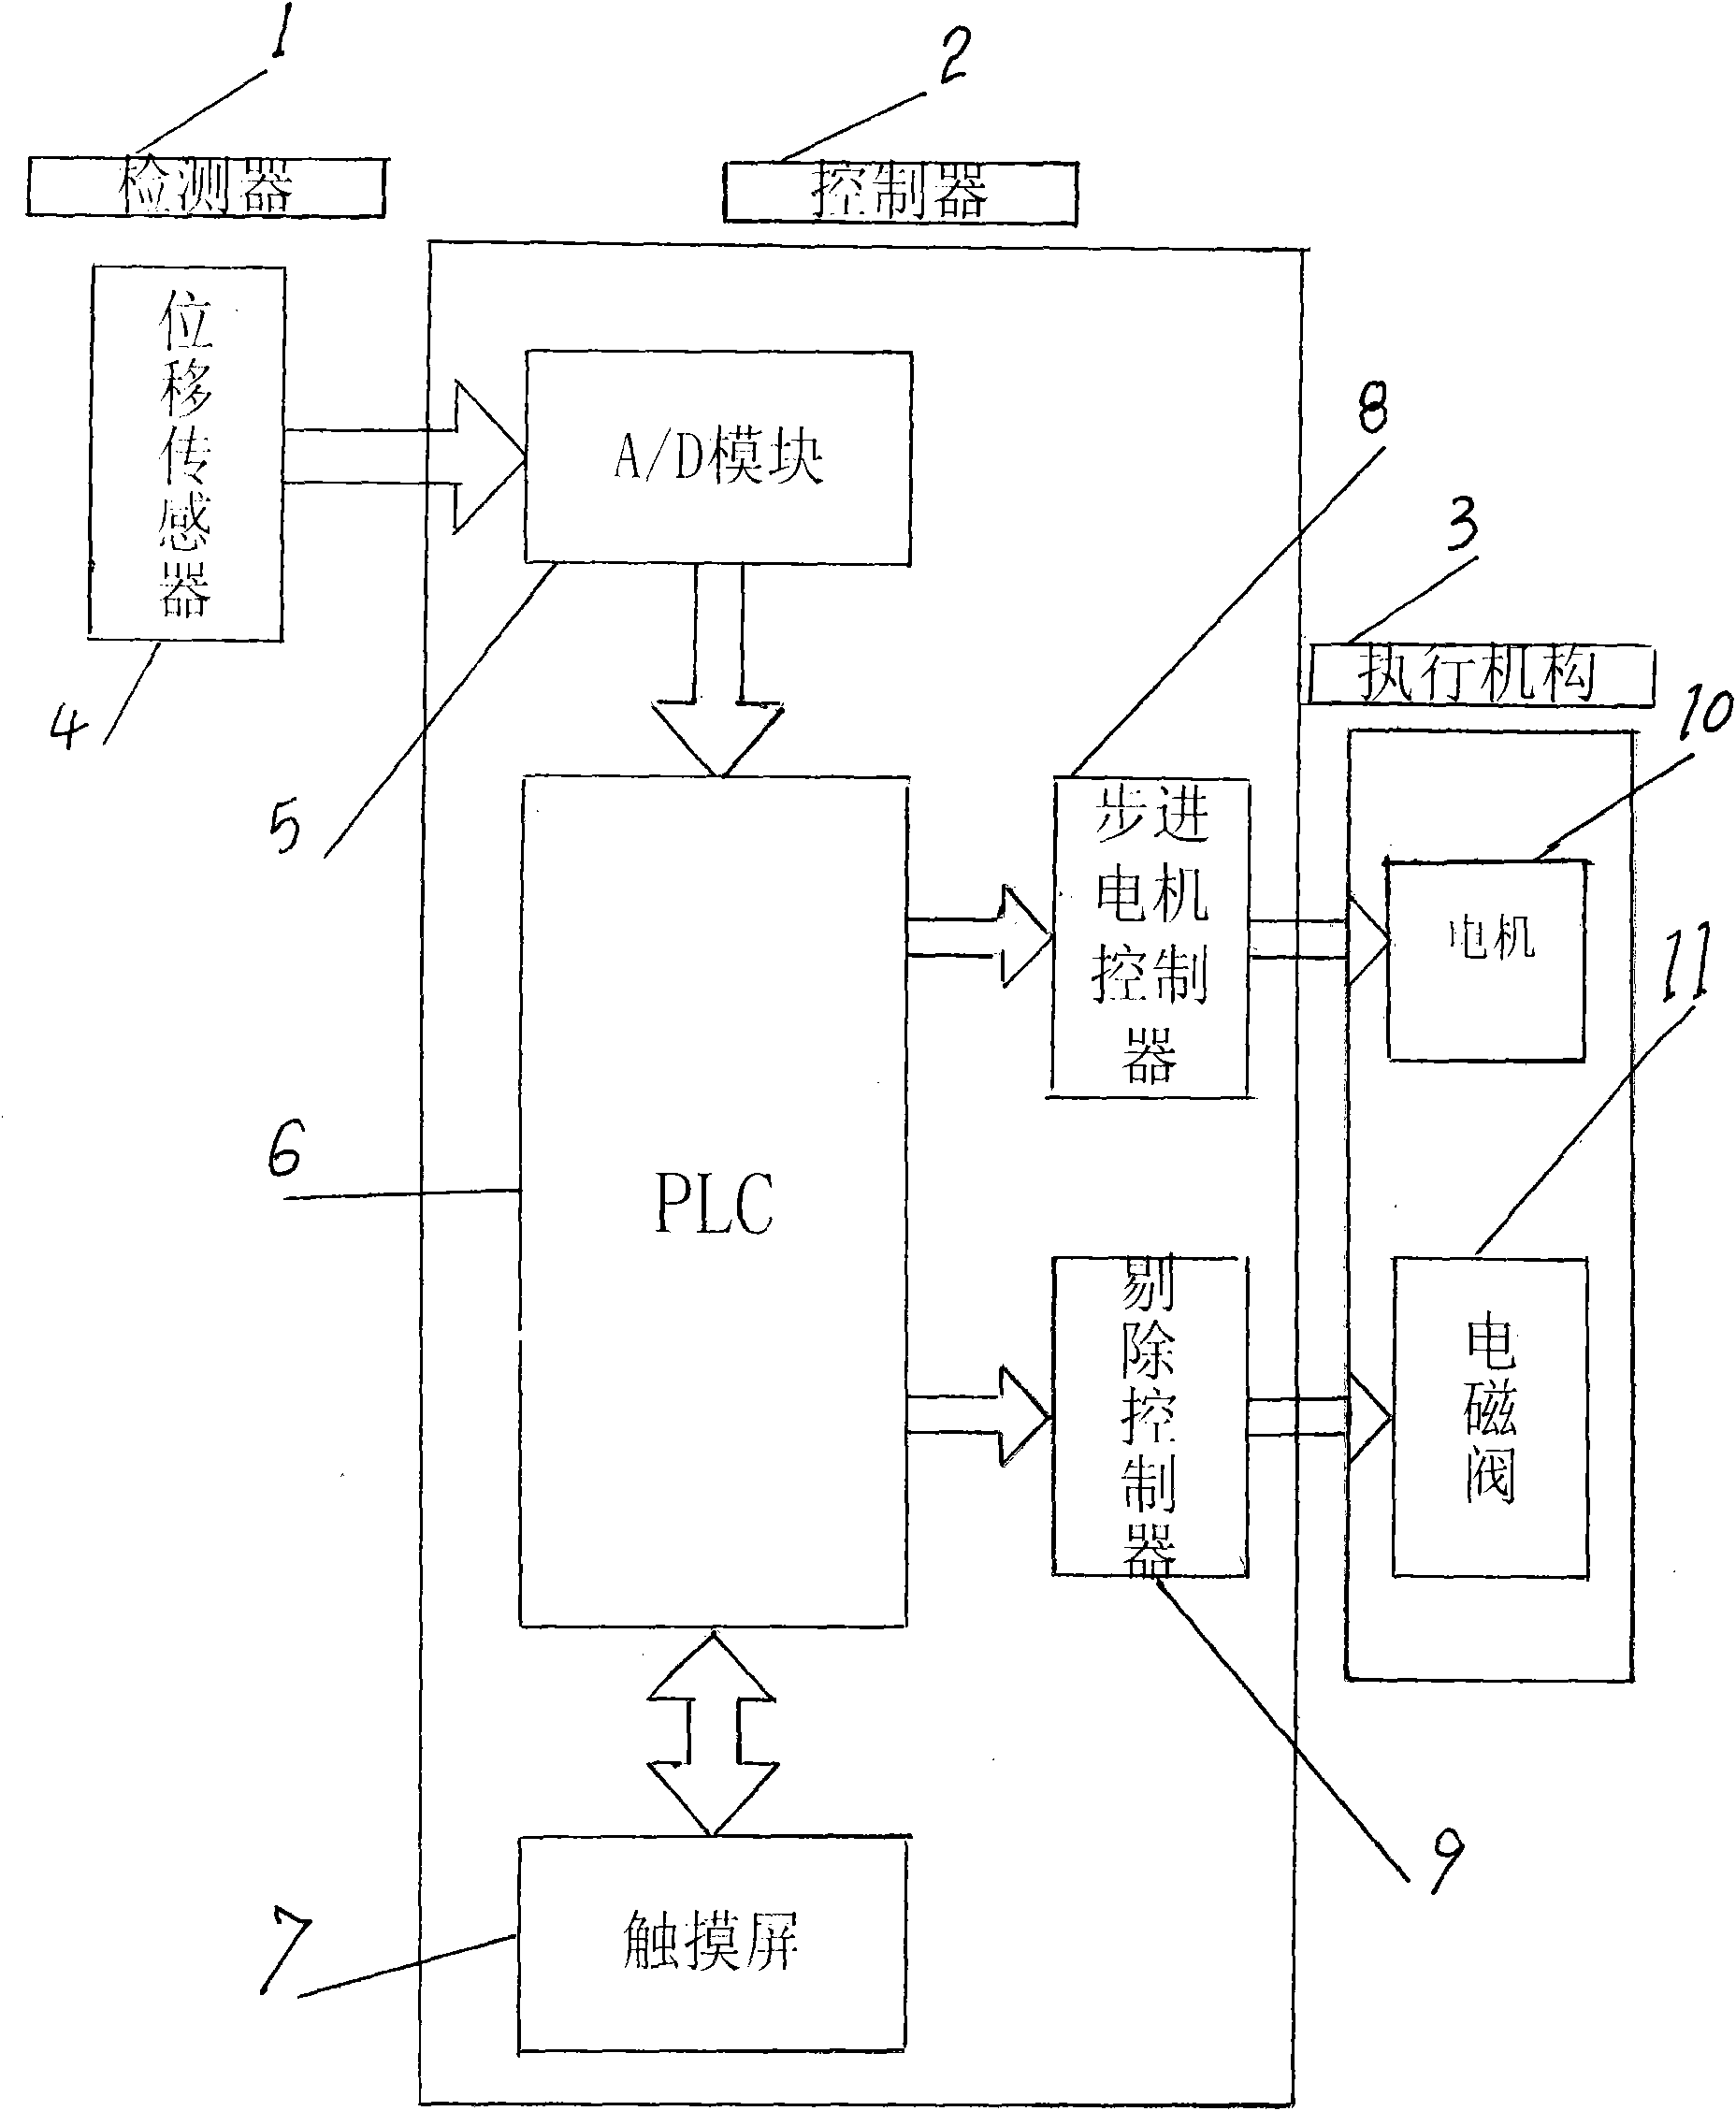 Automatic control device for correcting tipping paper of plug assembler